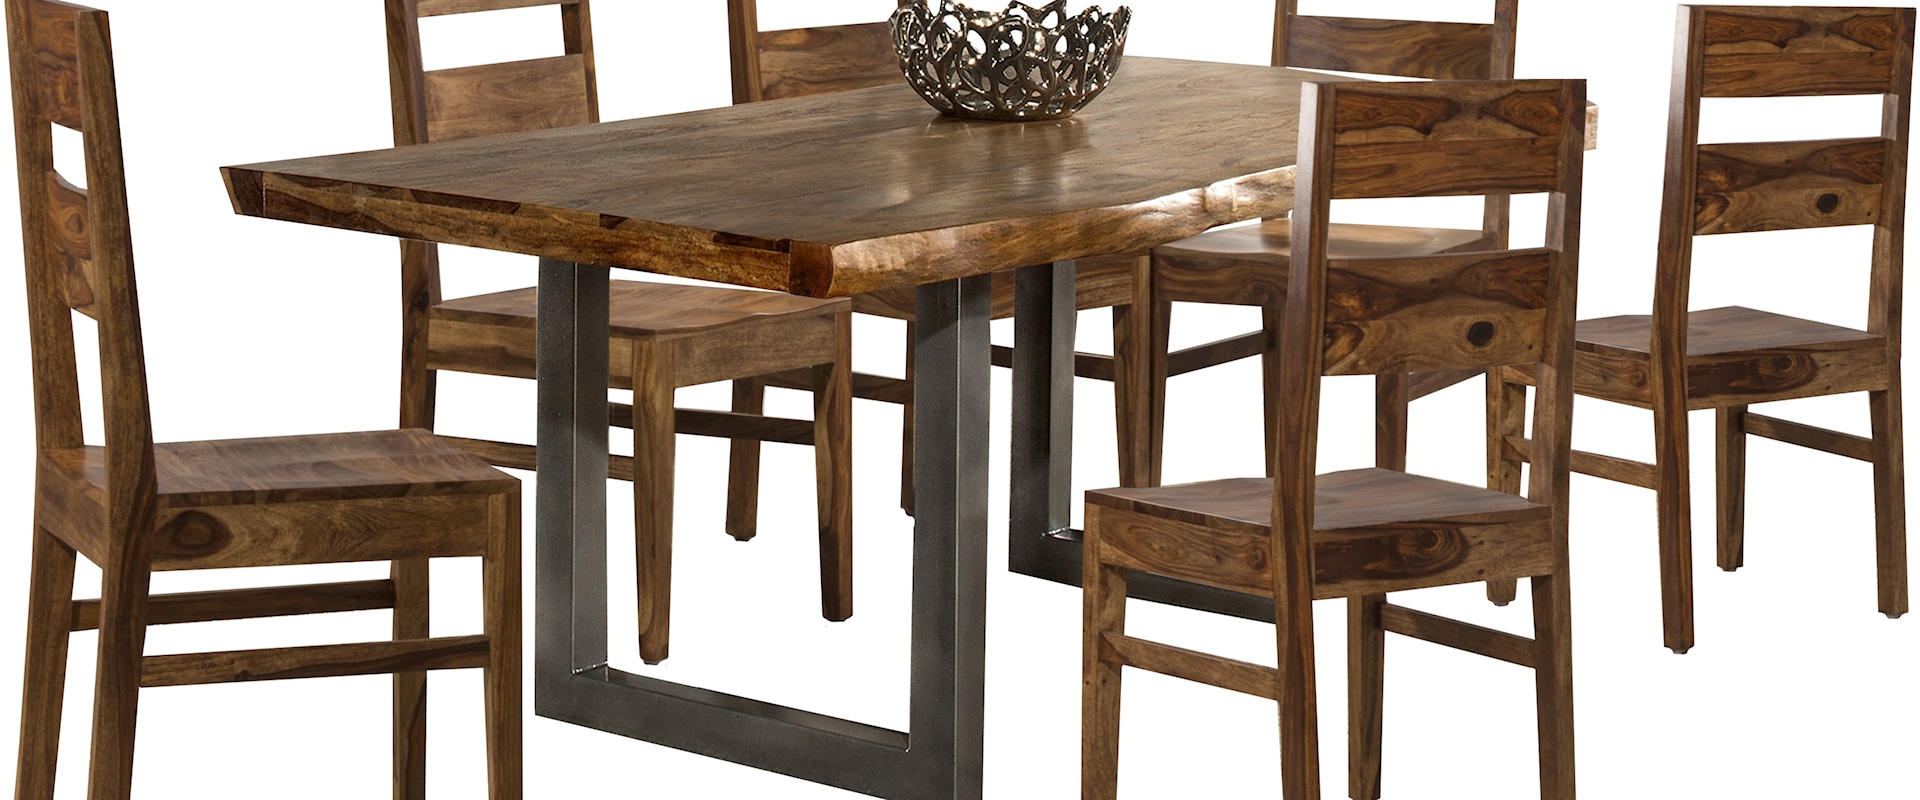 Emerson 7 Piece Rectangle Dining Set with Wood Chairs